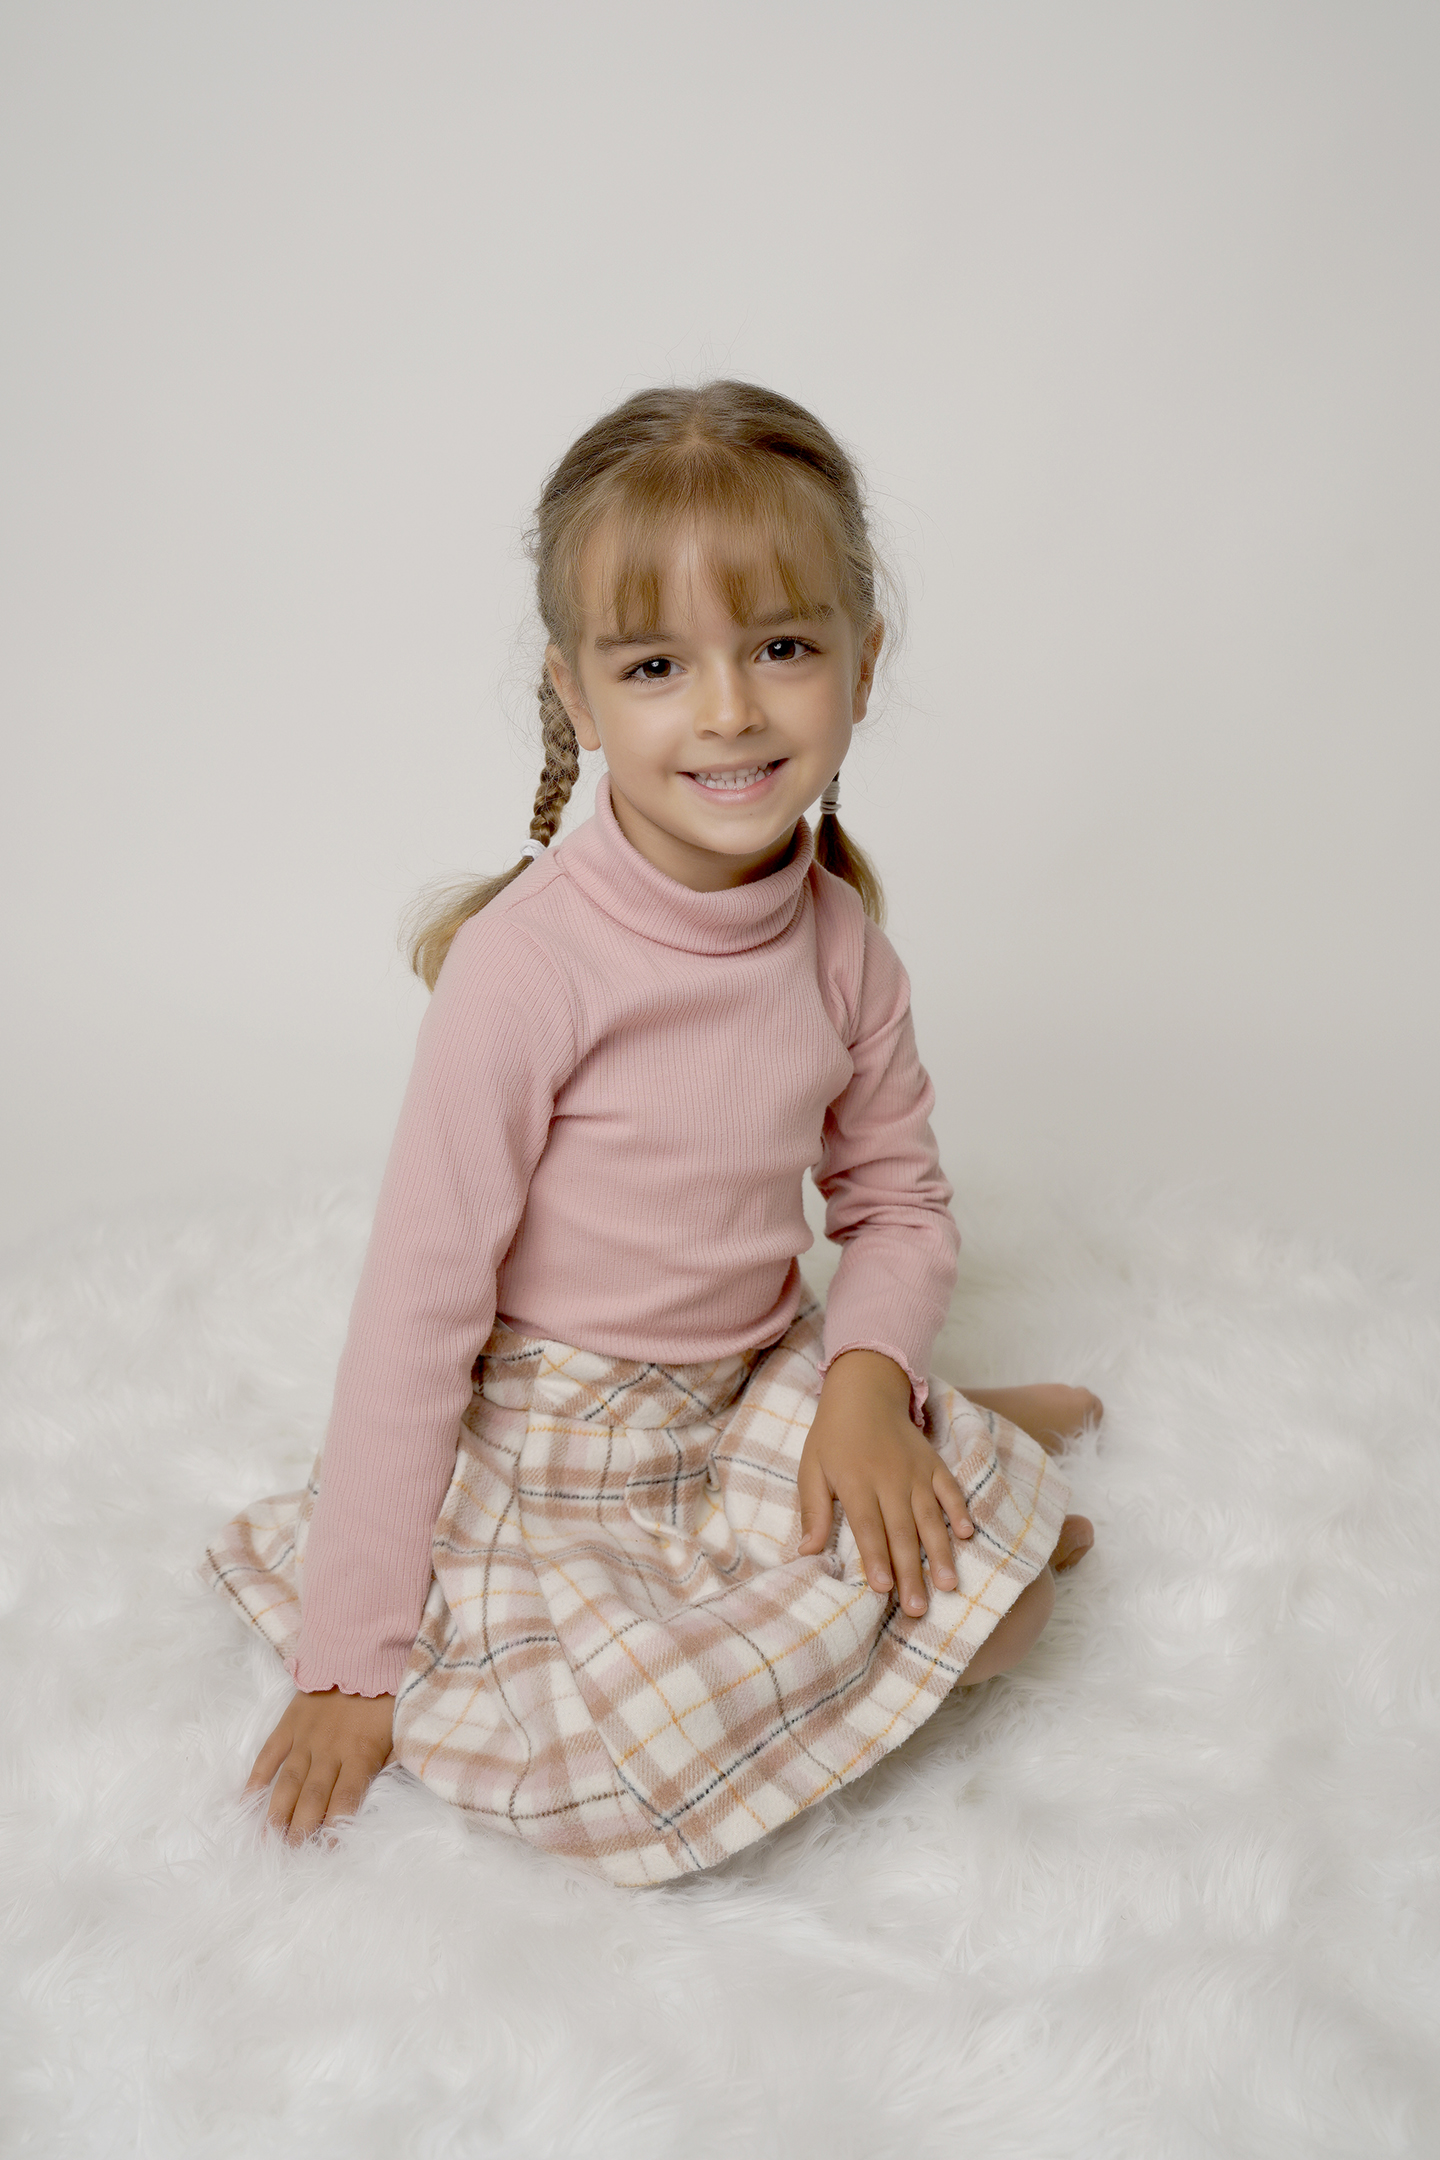 girl with blonde hair in plaits wearing a pink jumper by Nursery Photography in county Durham, Gateshead and Newcastle